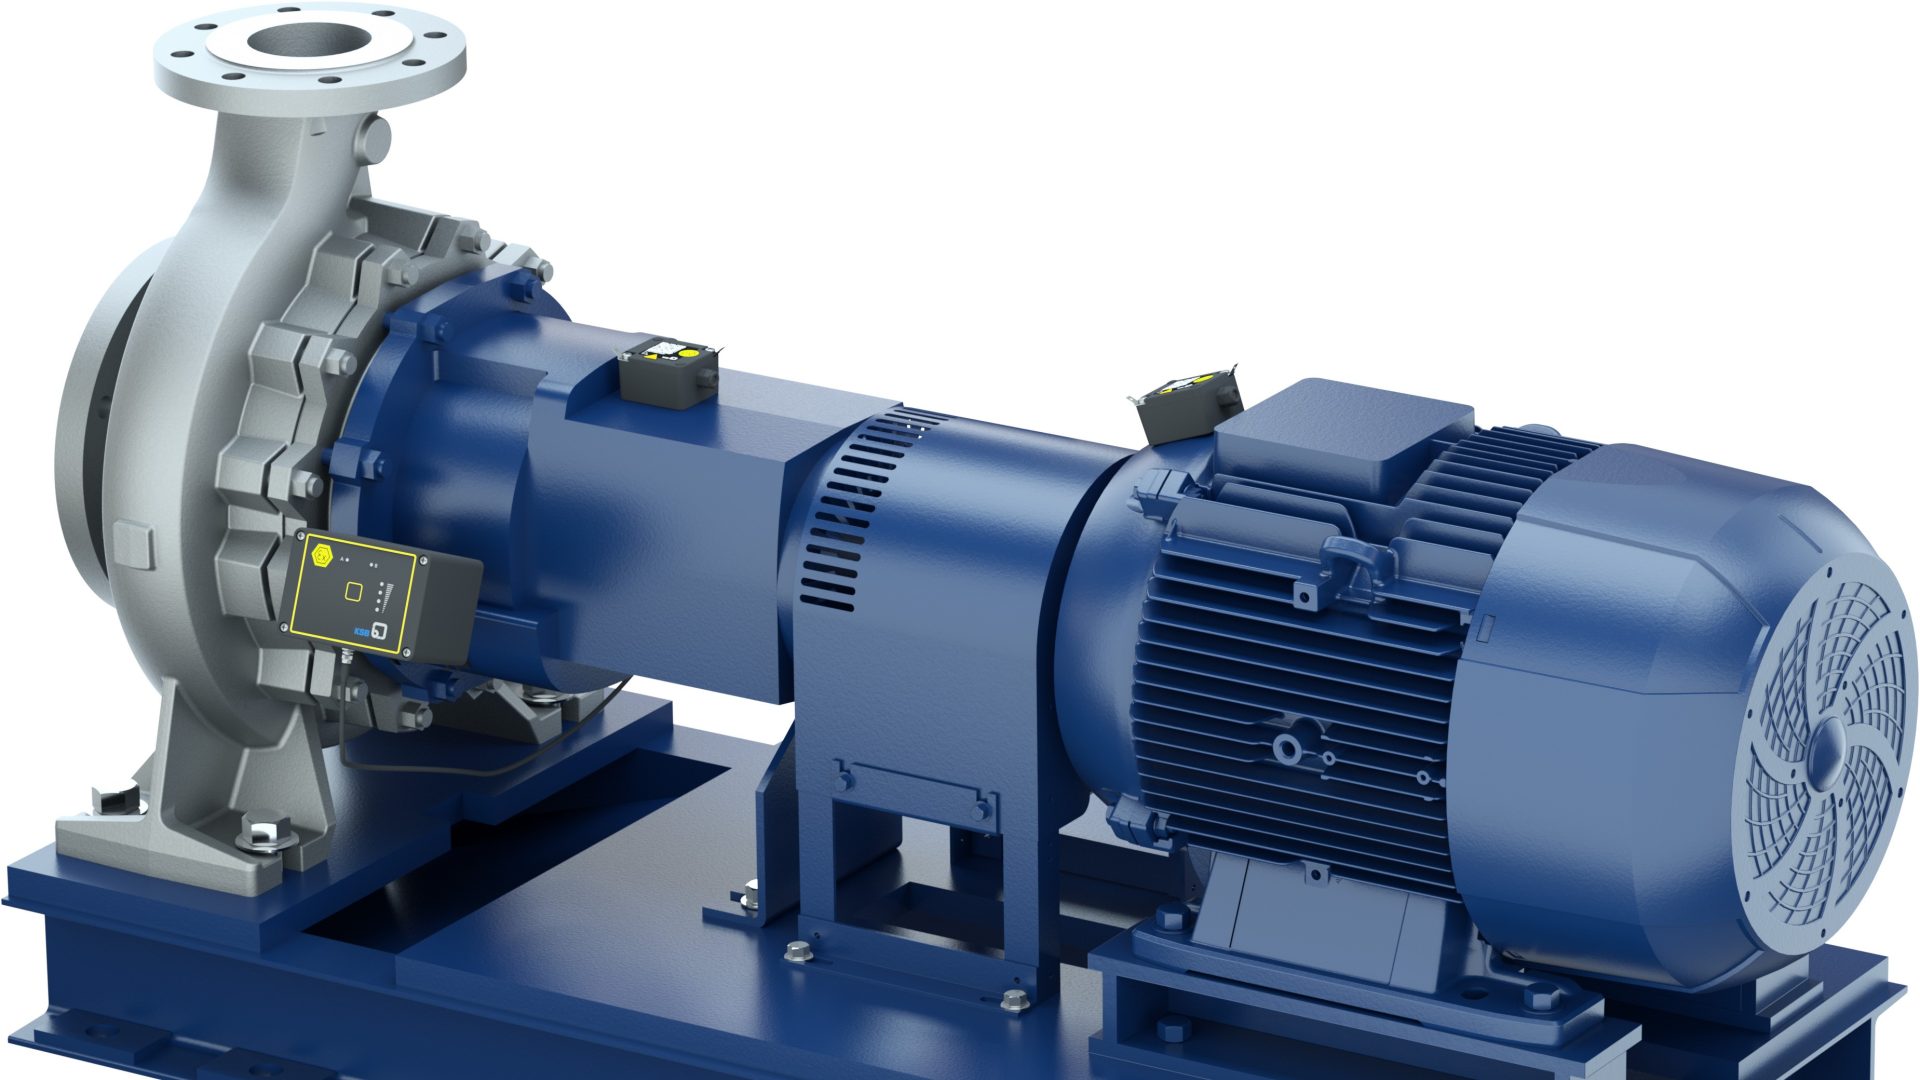 The MegaCPK series of standardised chemical pumps has been expanded to include 19 more sizes.